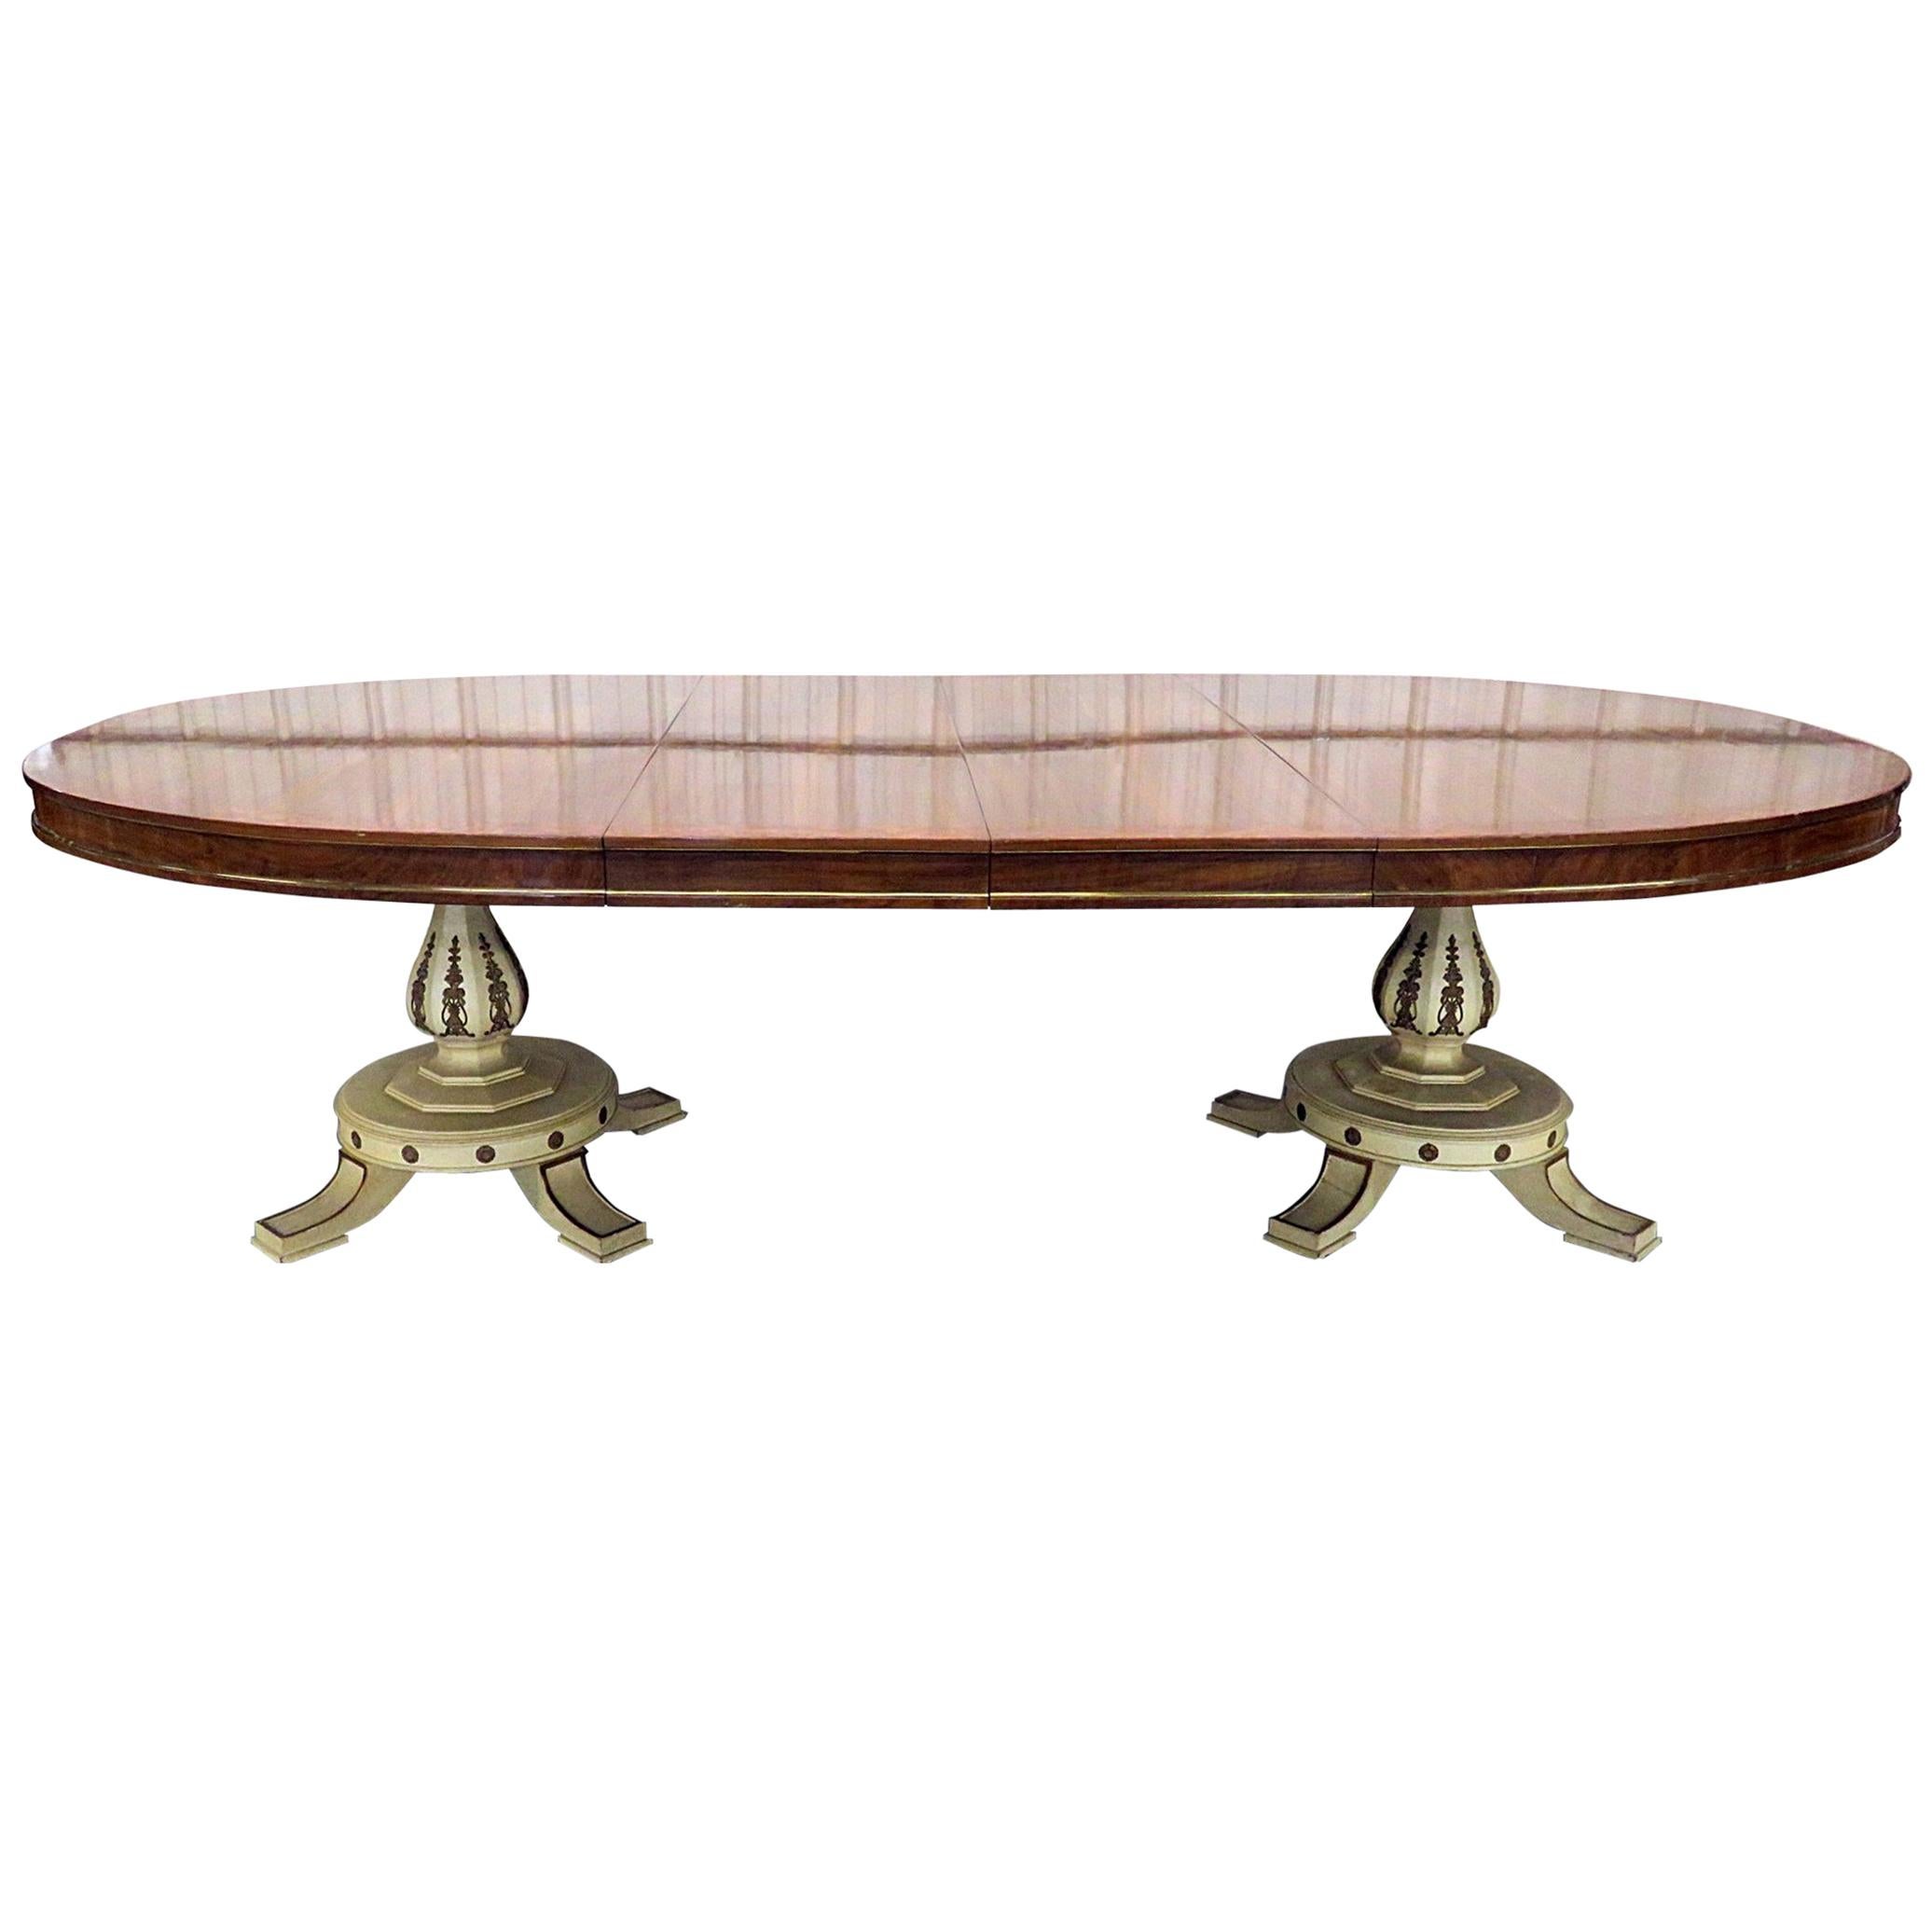 Gilded and Creme Painted Rosewood French Regency Style Dining Room Table 